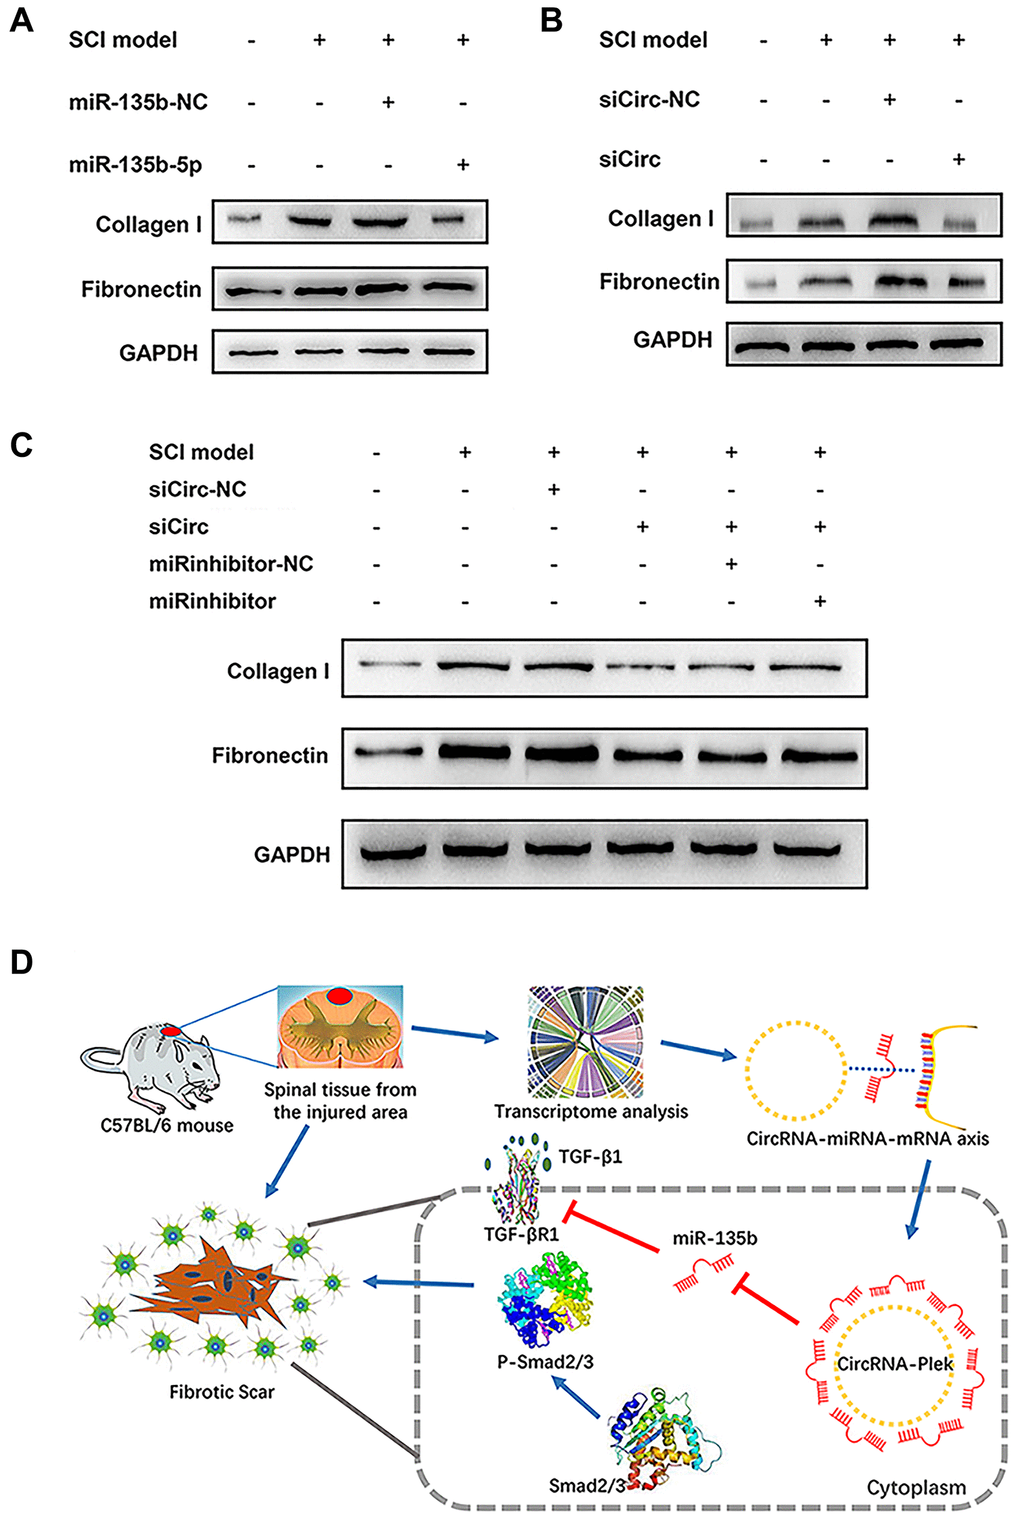 CircPlek/miR-135b-5p/TGF-βR1 axis regulated the progression of fibrosis. (A) Western blot showing fibronectin and collagen I protein levels in the control, SCI model, SCI + mimic NC, and SCI + miR-135b-5p mimics groups. (B) Western blotting showing fibronectin and collagen I protein levels in the control, SCI model, SCI + siCircRNA NC, and SCI + siCircPlek groups. (C) After co-transfection of spinal fibroblasts with siCircPlek and an miR-135b-5p inhibitor with or without SCI, fibronectin and collagen I protein levels were measured using western blotting. (D) Proposed model of the function of CircPlek in the regulation of fibrosis via the miR-135b-5p/TGF-βR1 axis in spinal fibroblasts. Under SCI, the expression of CircPlek was upregulated. Elevated CircPlek attracting miR-135b-5p, which bound to TGF-βR1, consequently inducing the activation of fibroblasts and fibrous scar formation.